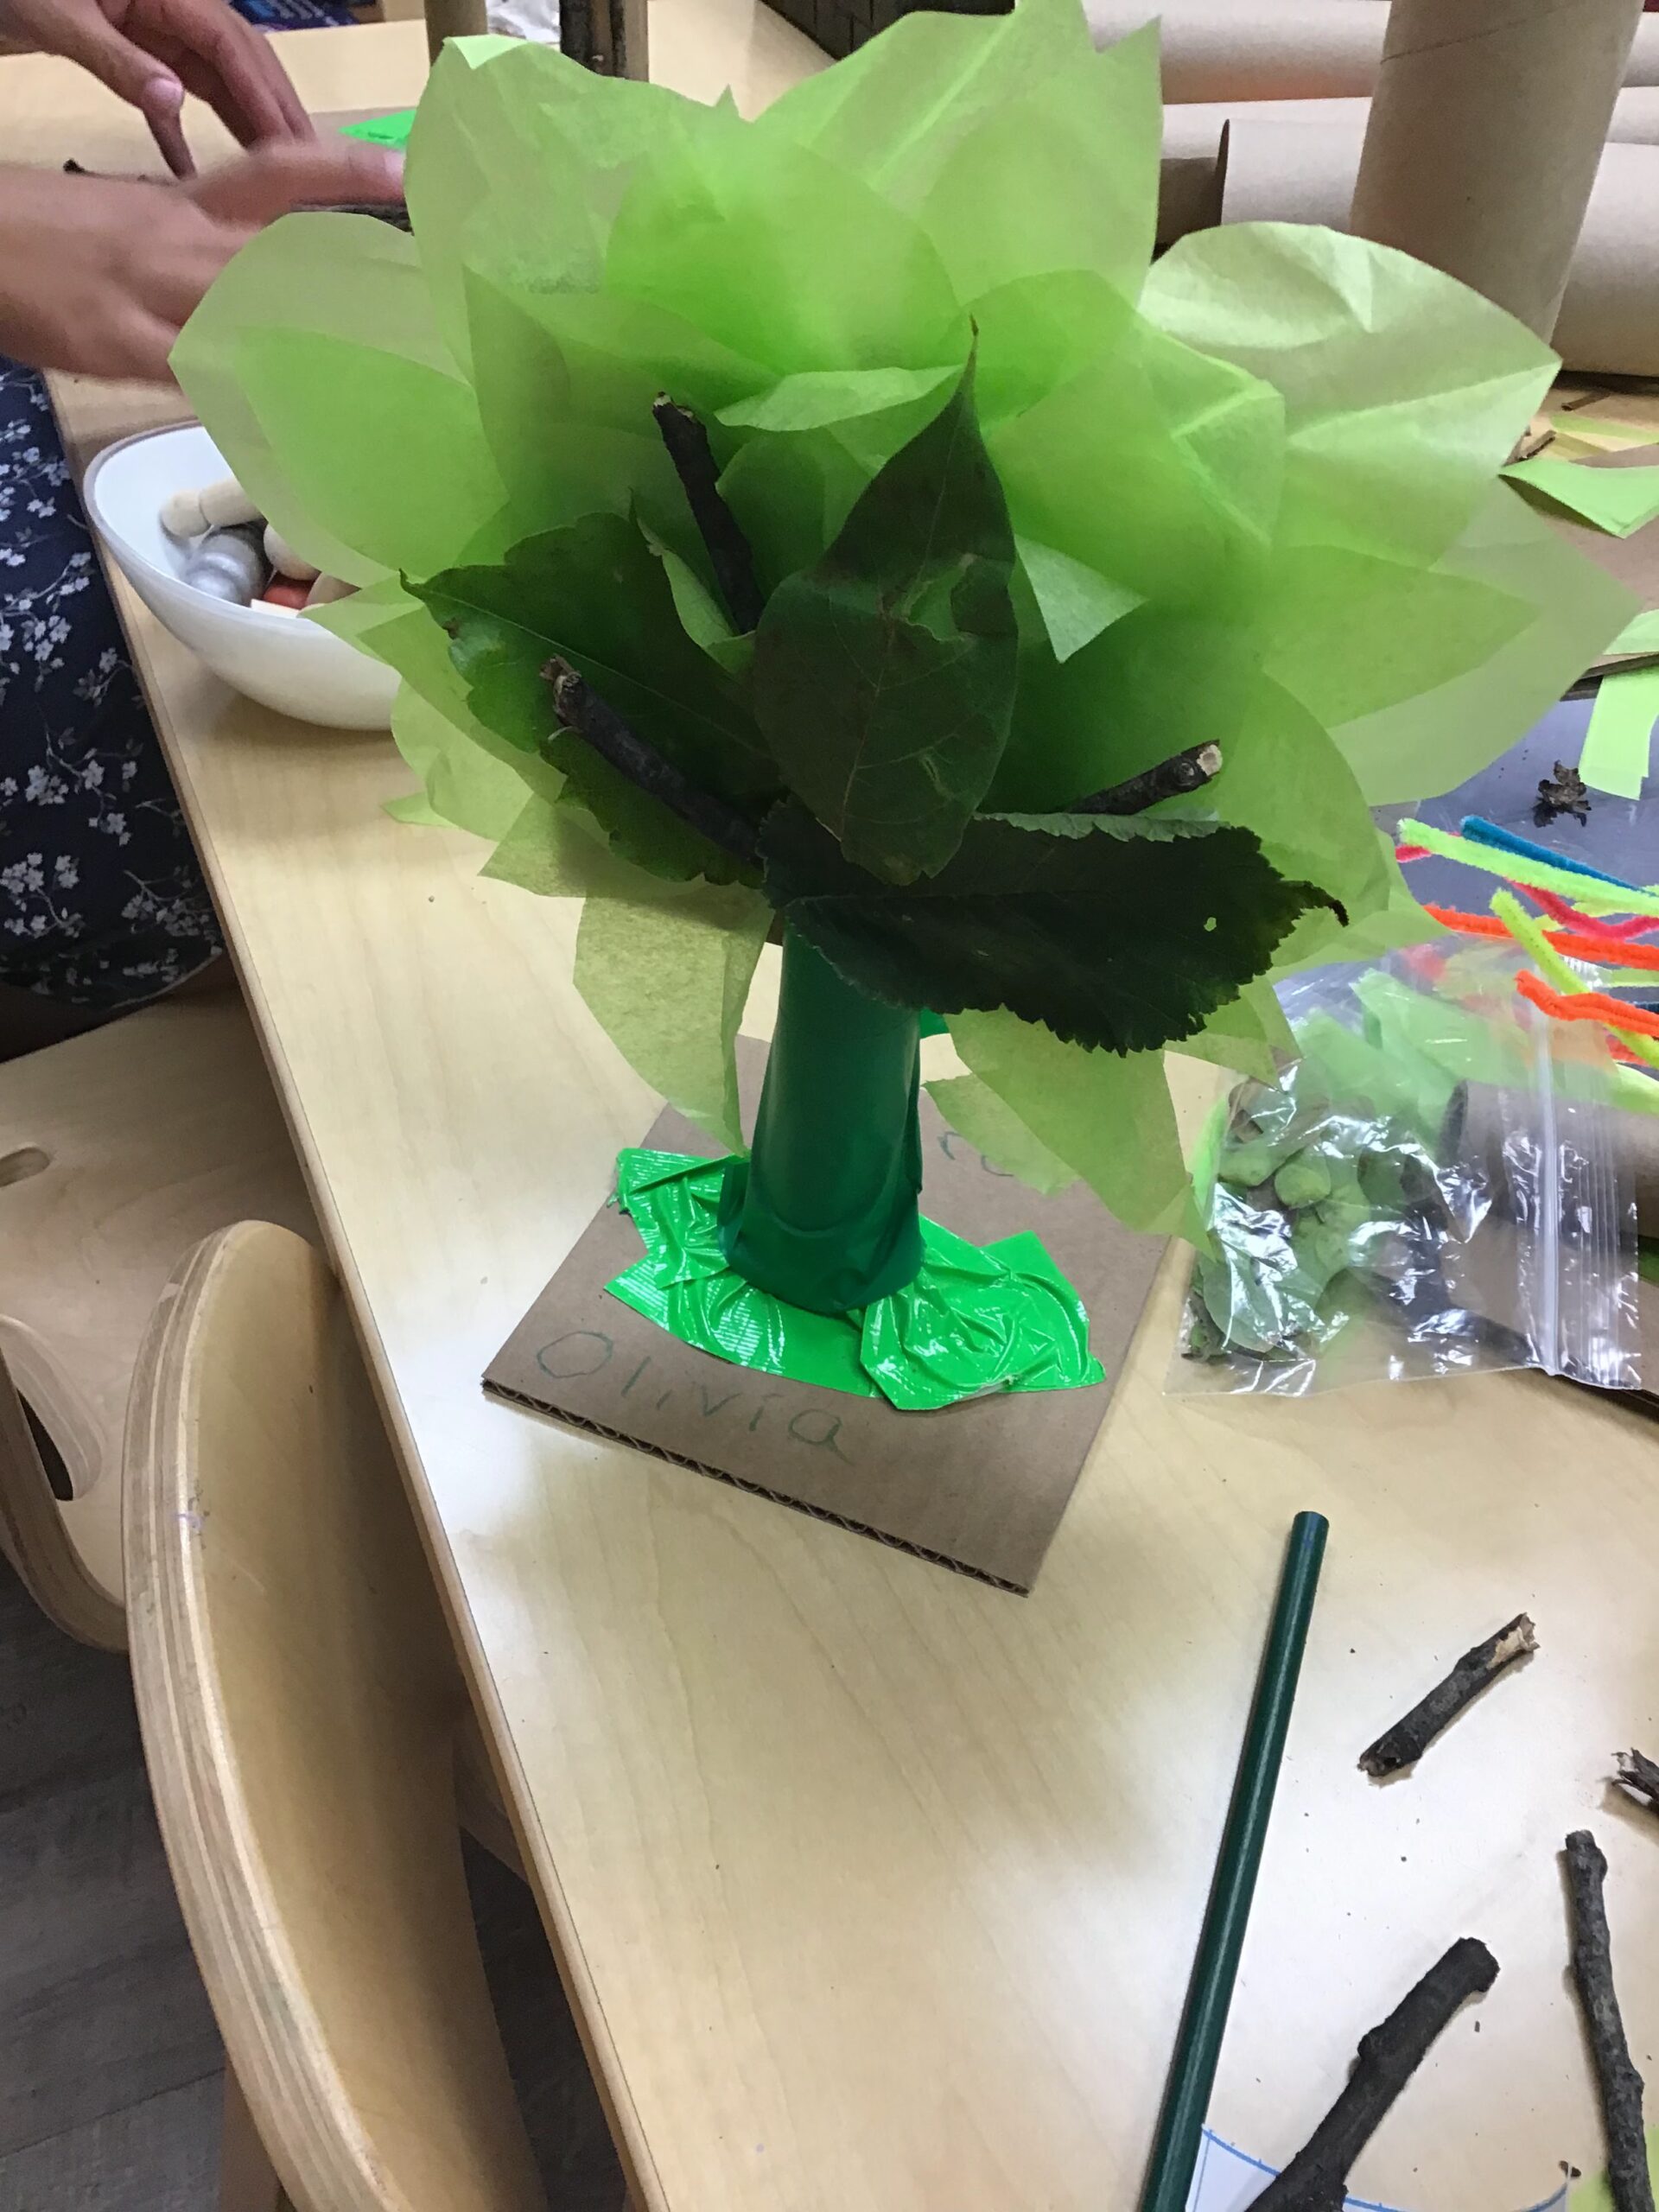 DIY tree craft made out of cardboard and leaves